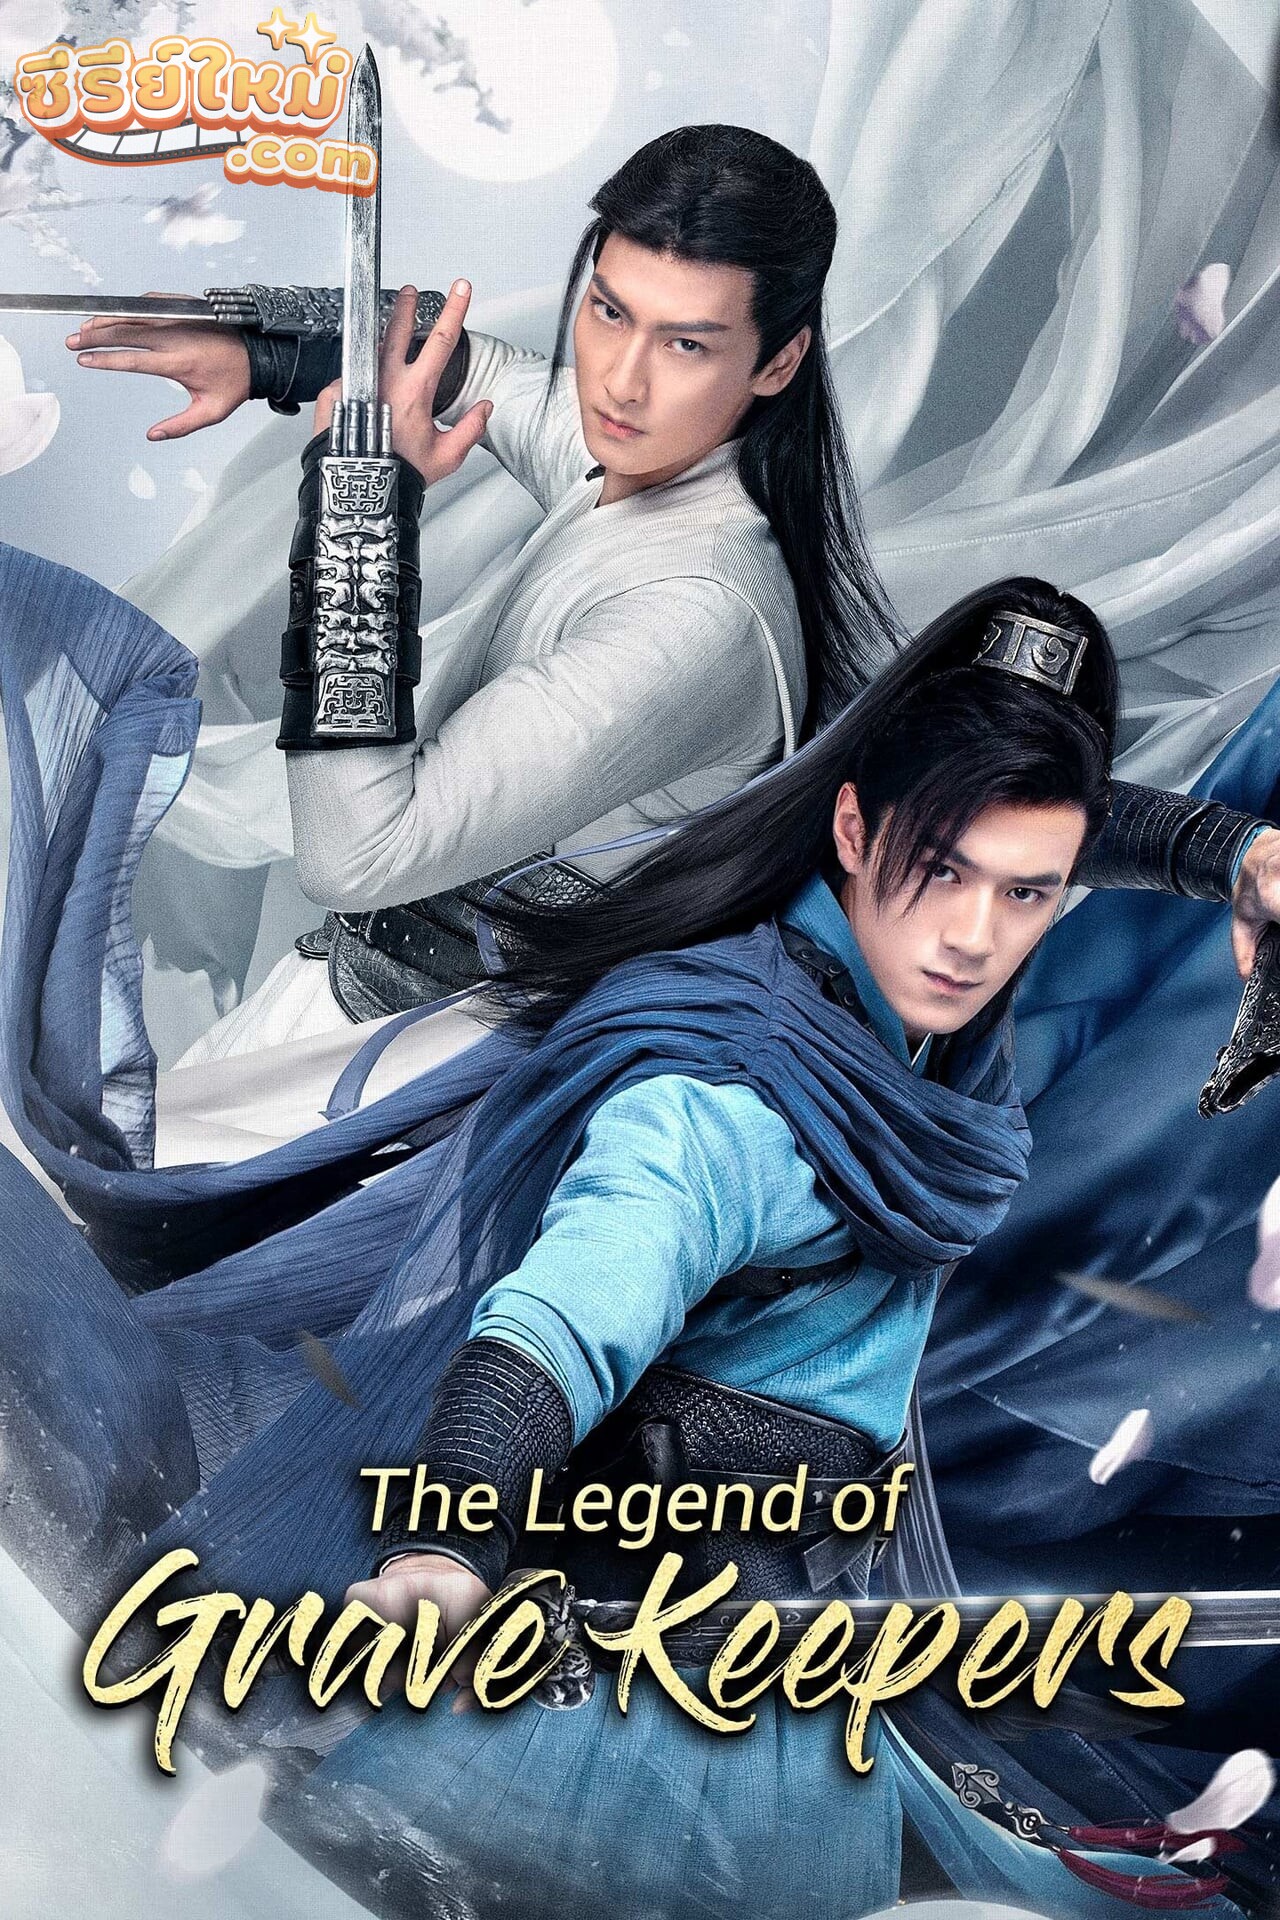 The Legend of Grave Keepers ราชาแห่งสุสาน (2021)